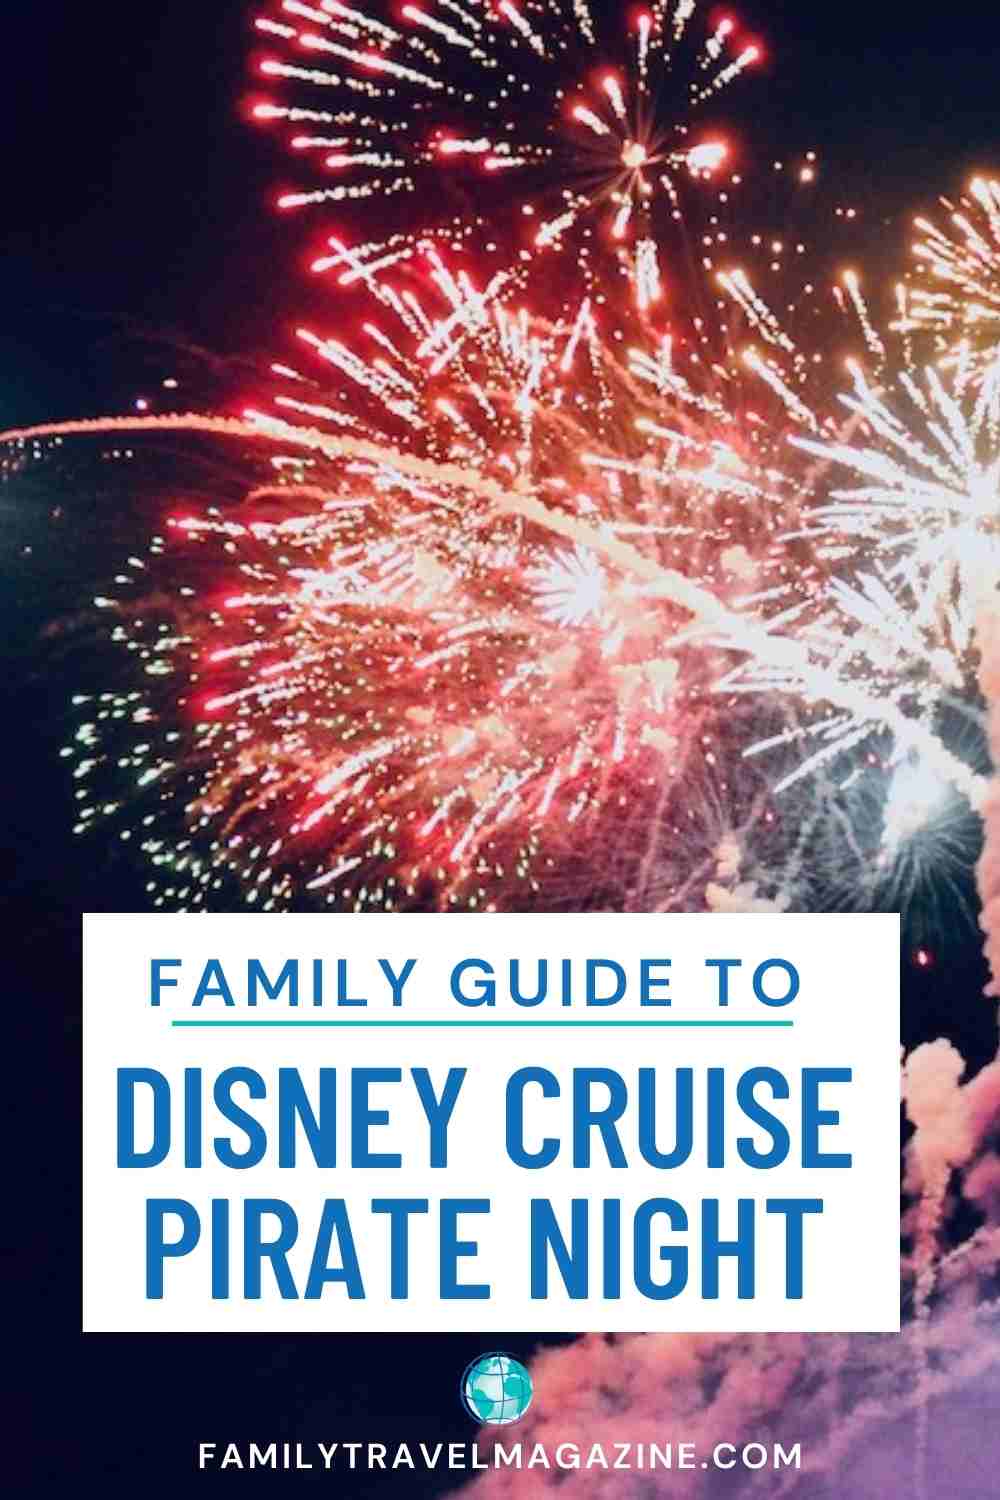 A Pirate Night For Me! Review of Disney Dream's Pirate Night